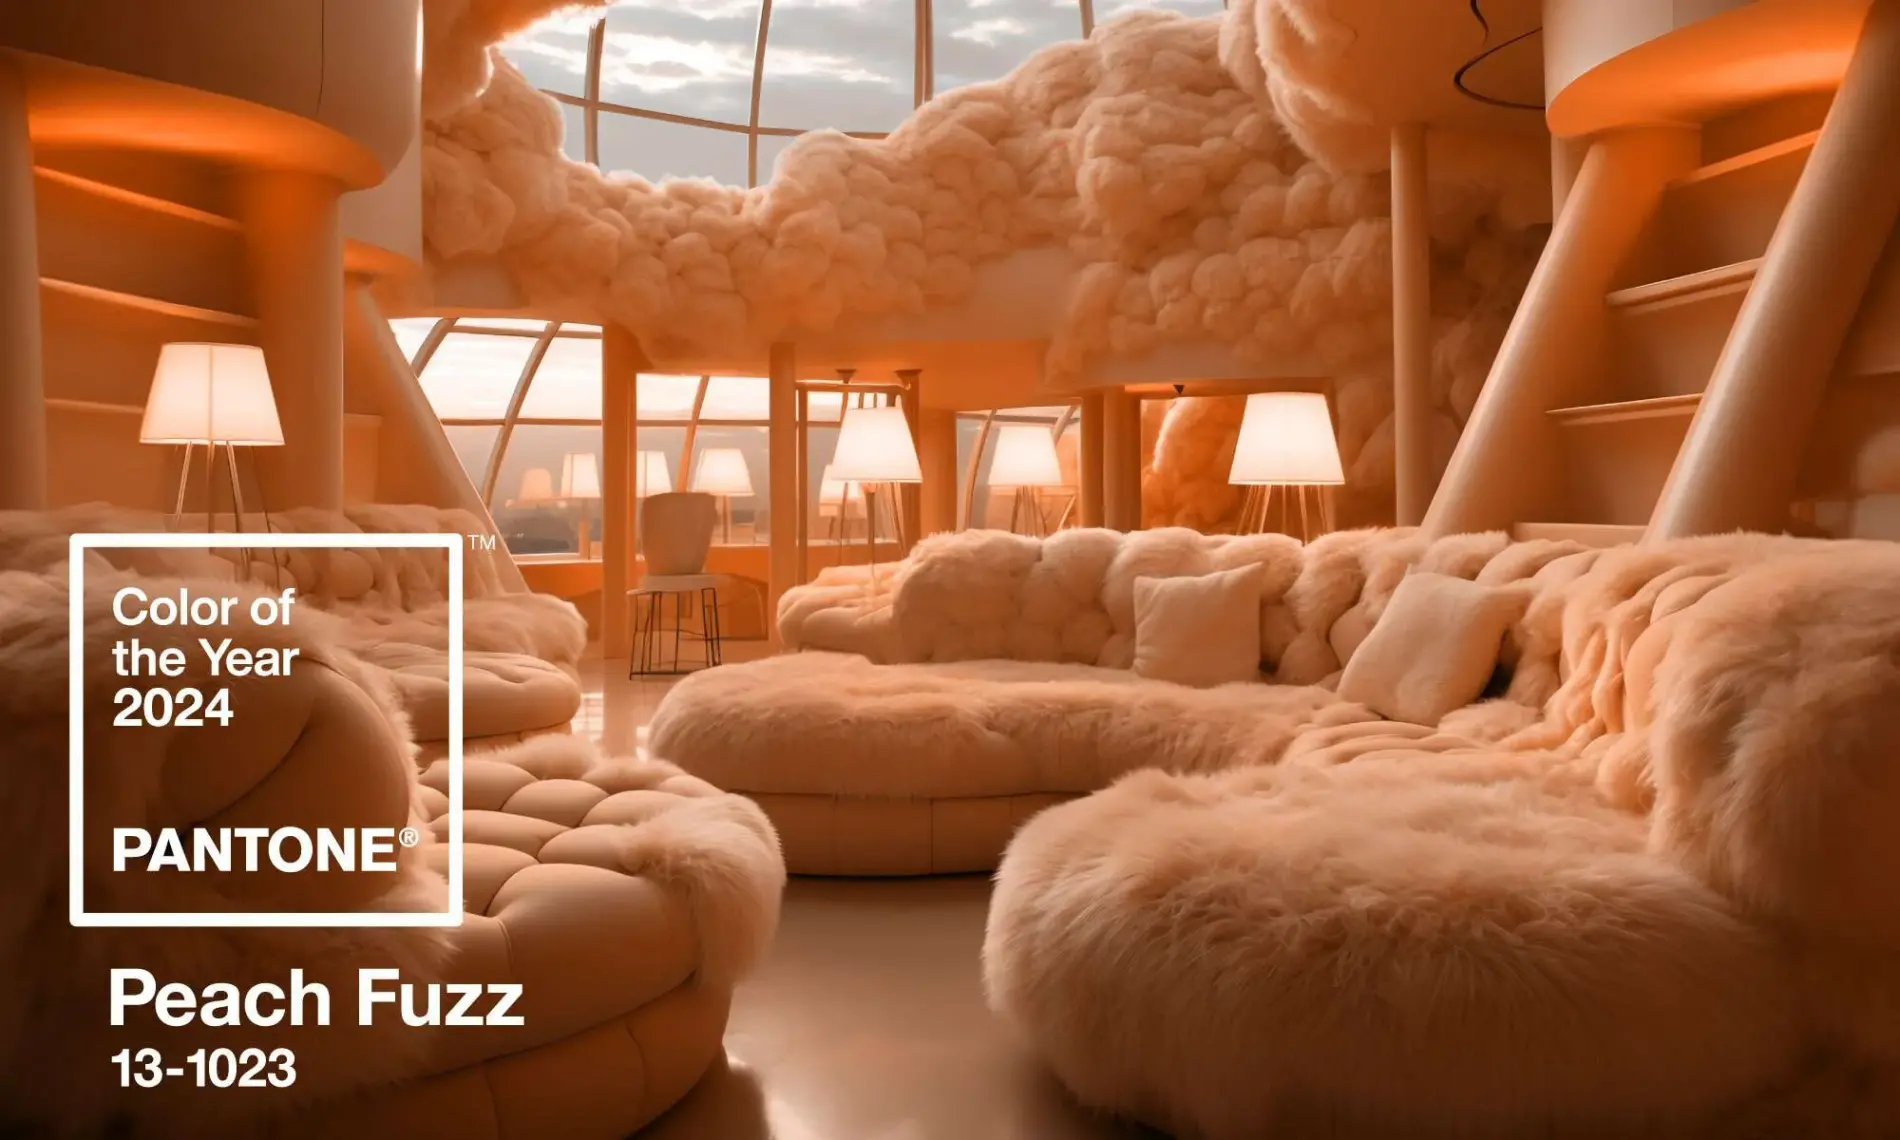 pantone-color-of-the-year-2024-article-2-SOFA